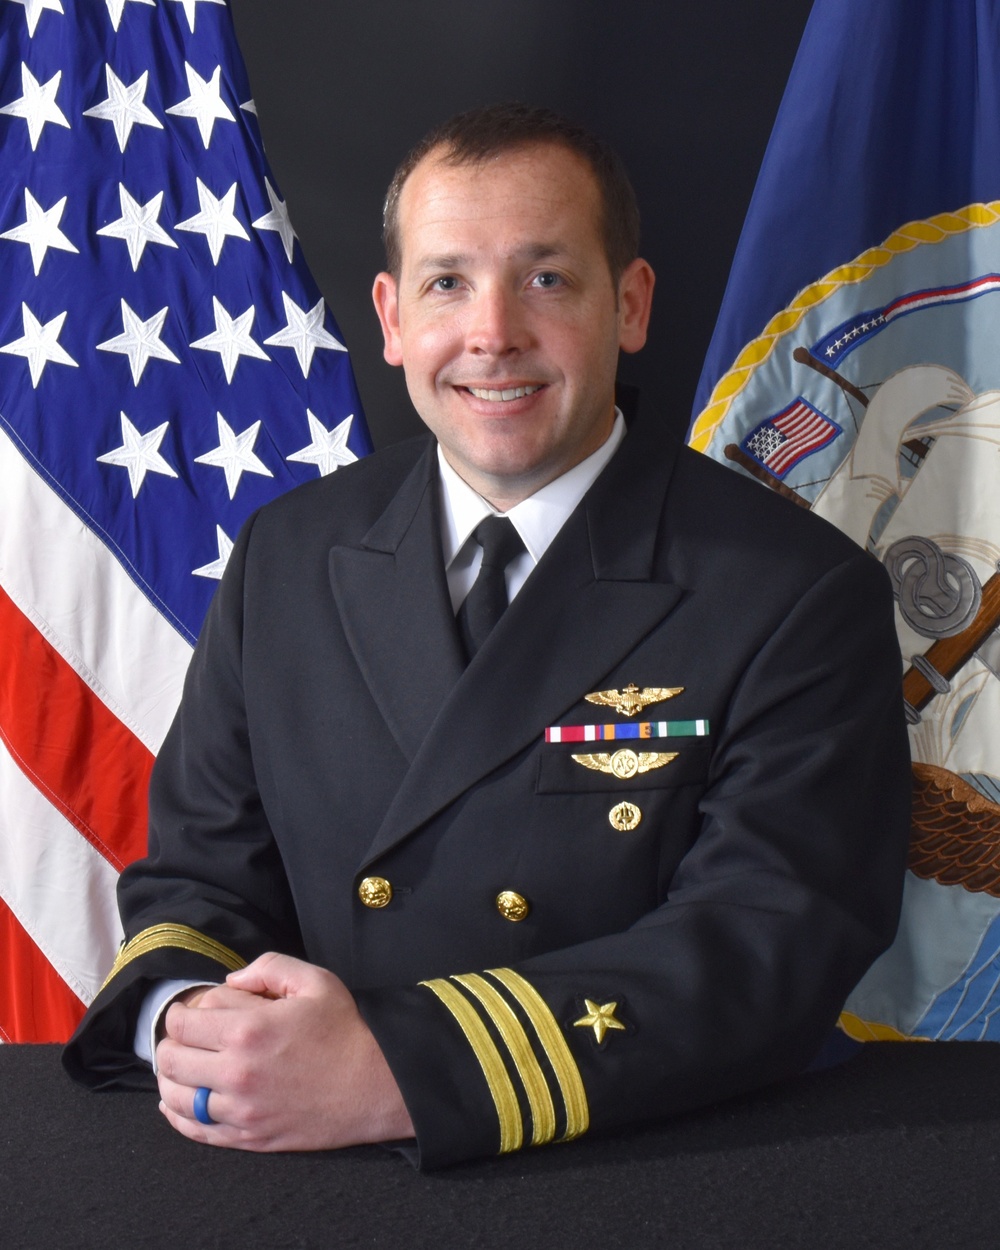 CDR Allen Grimes, NAS JRB Fort Worth Executive Officer Official Photo